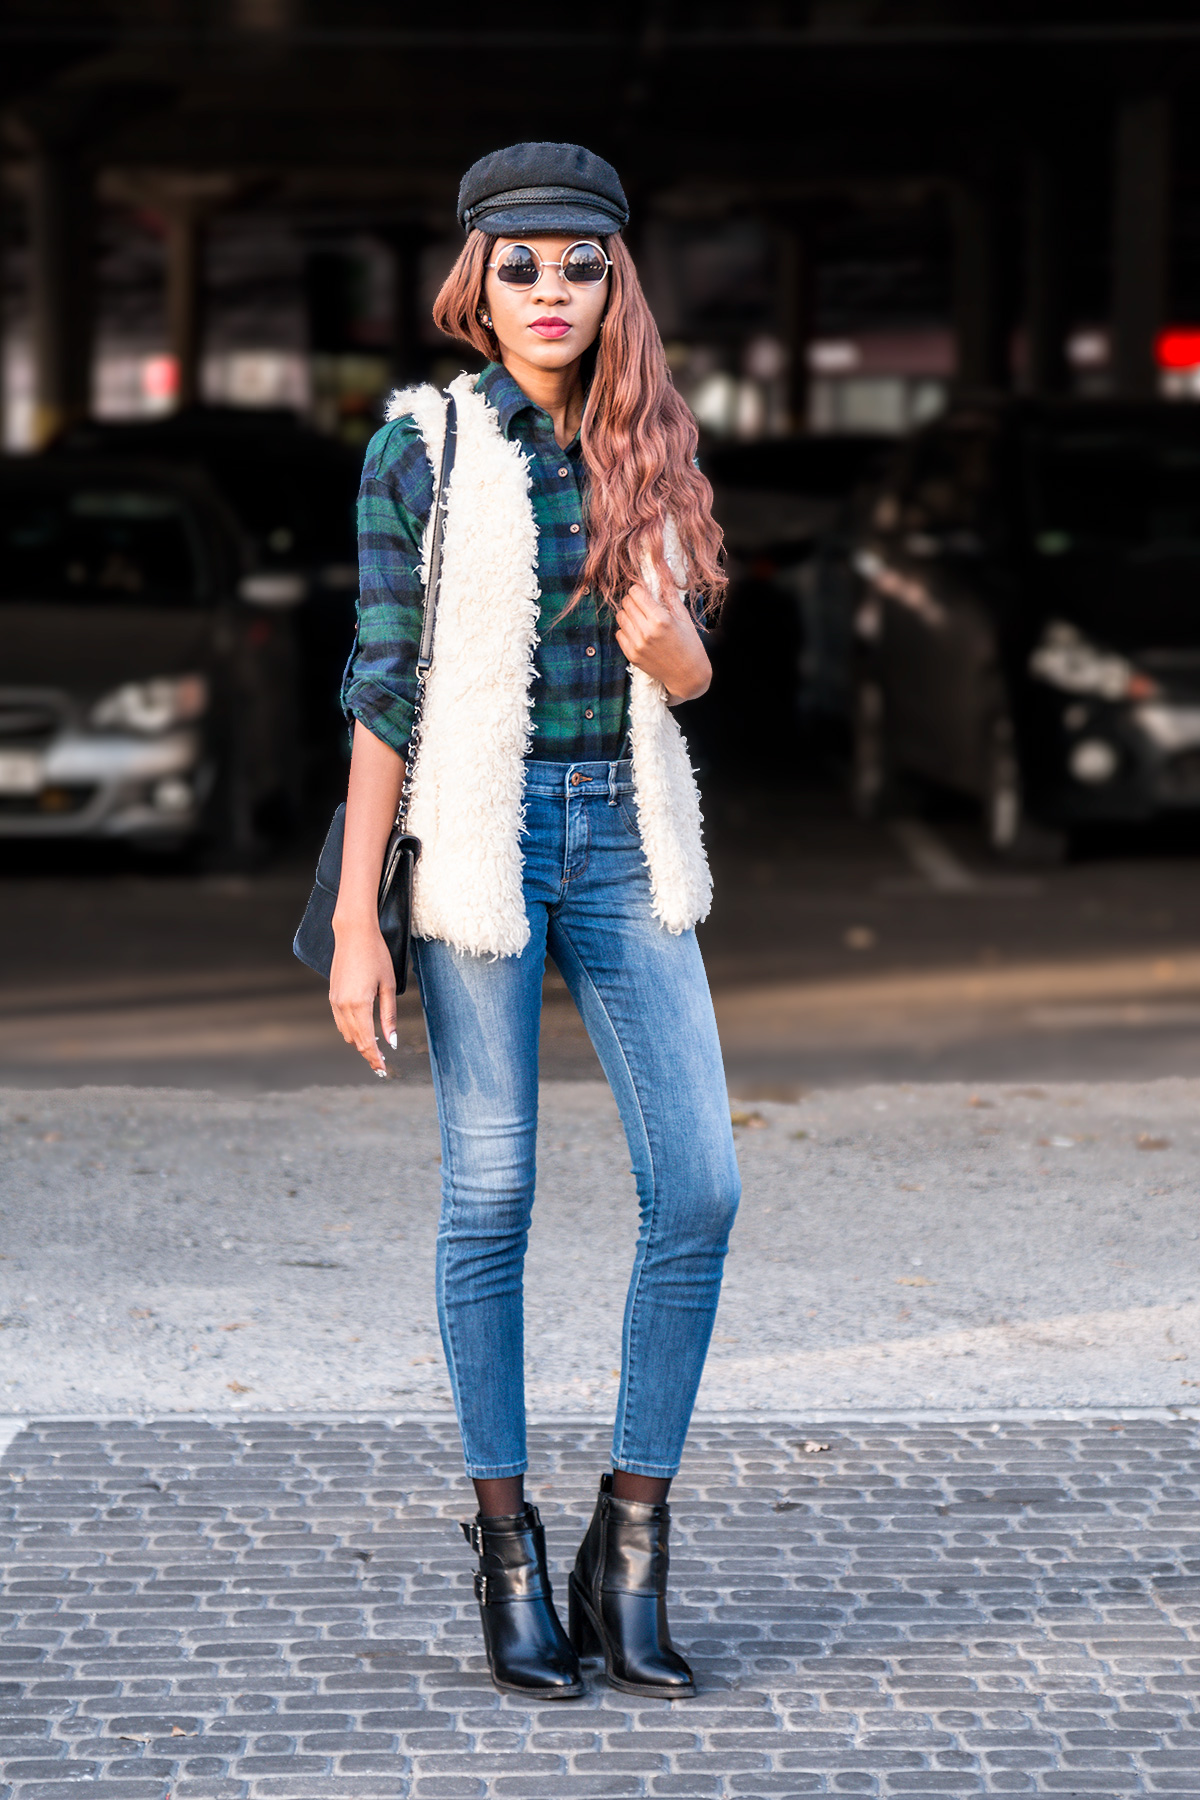 Faux fur gilet on plaid shirt styled with denim jeggings